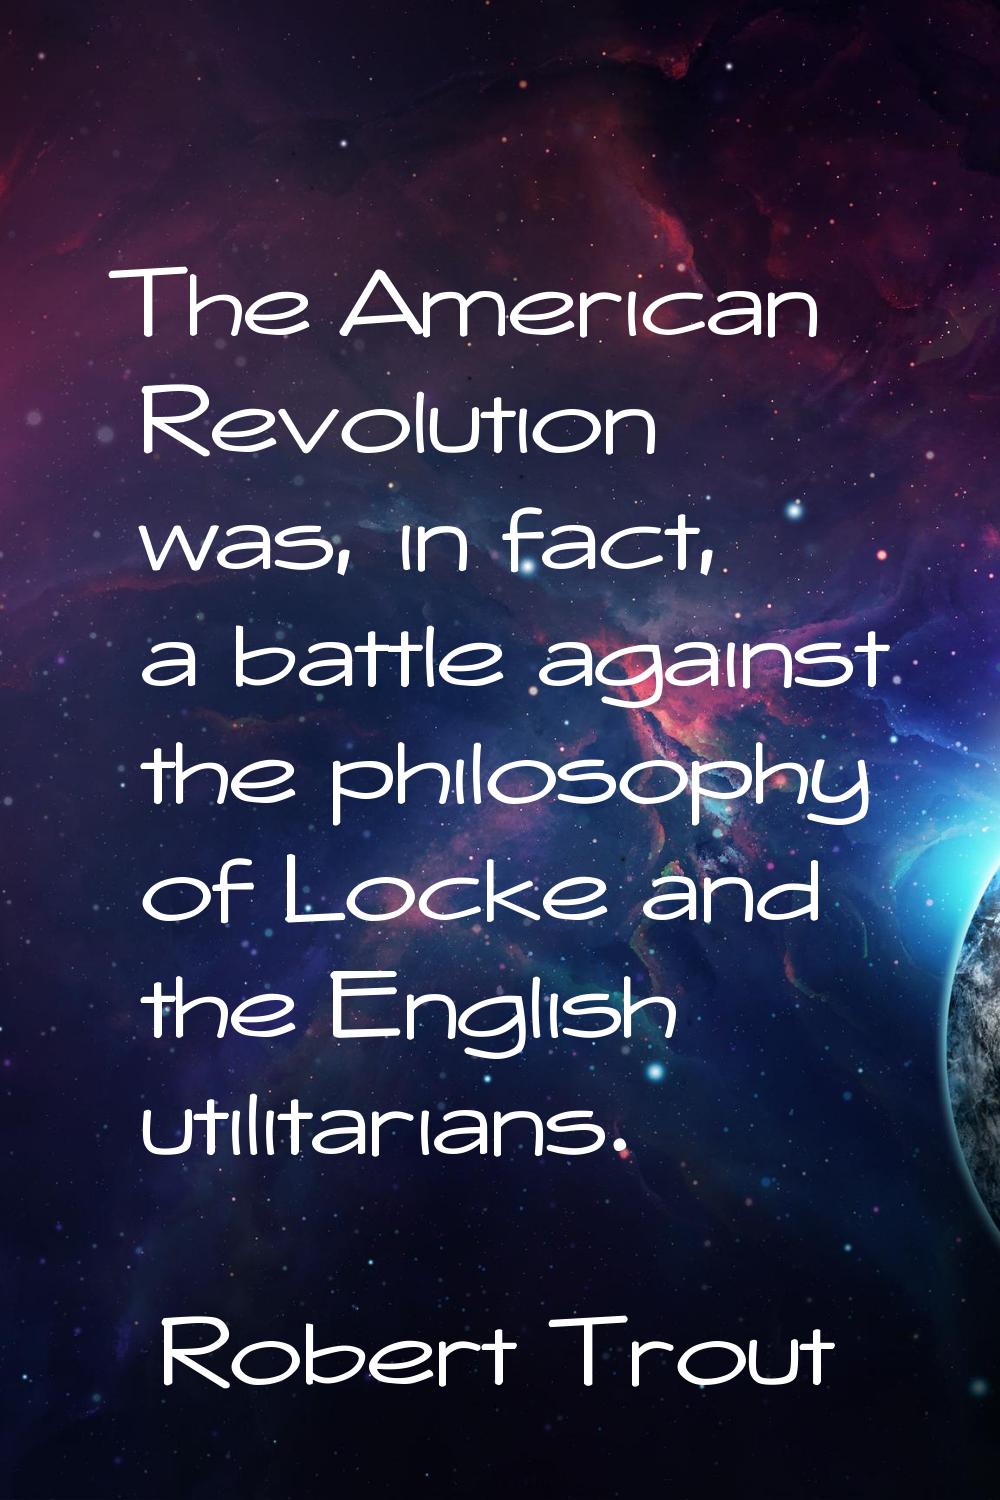 The American Revolution was, in fact, a battle against the philosophy of Locke and the English util